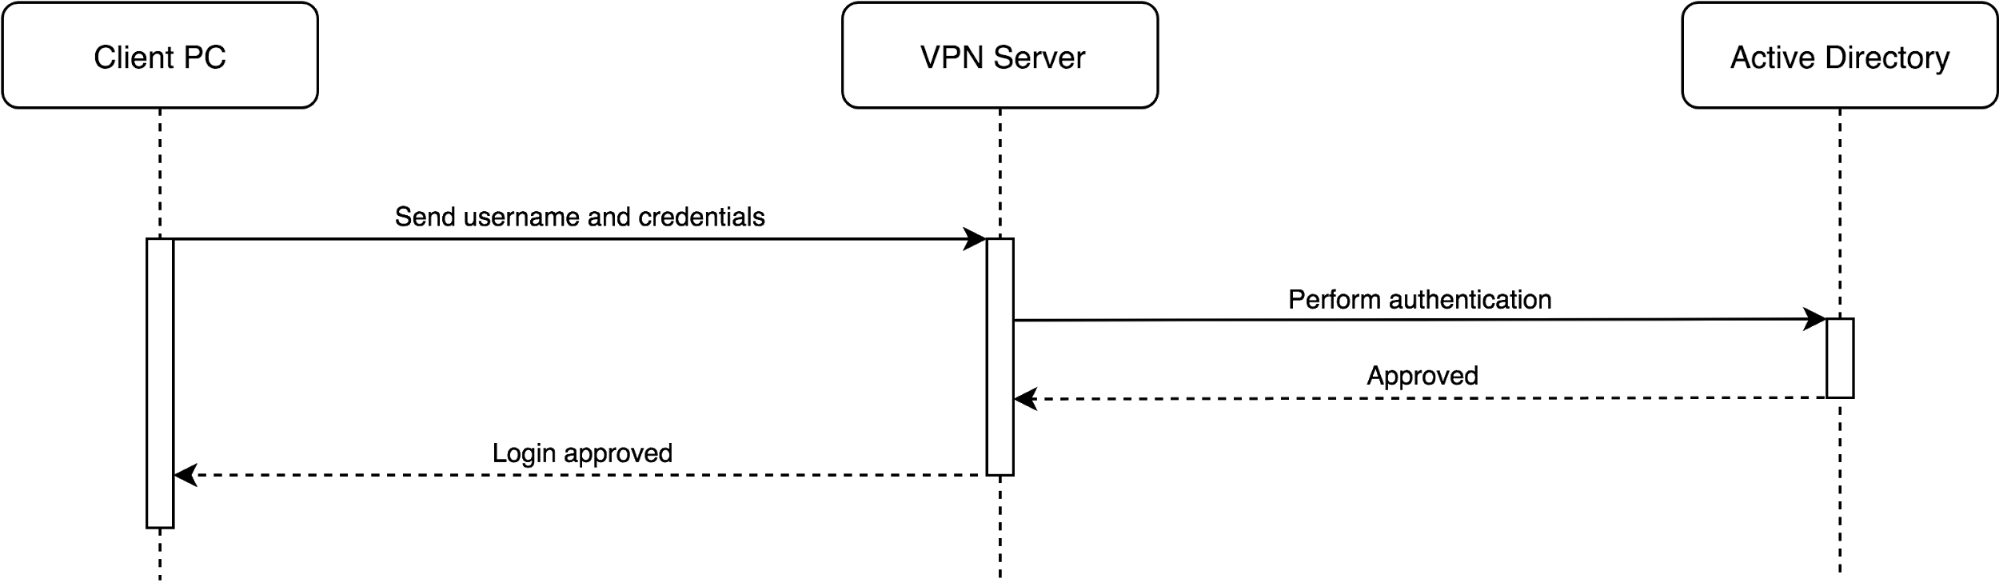 Pre-existing VPN authentication sequence